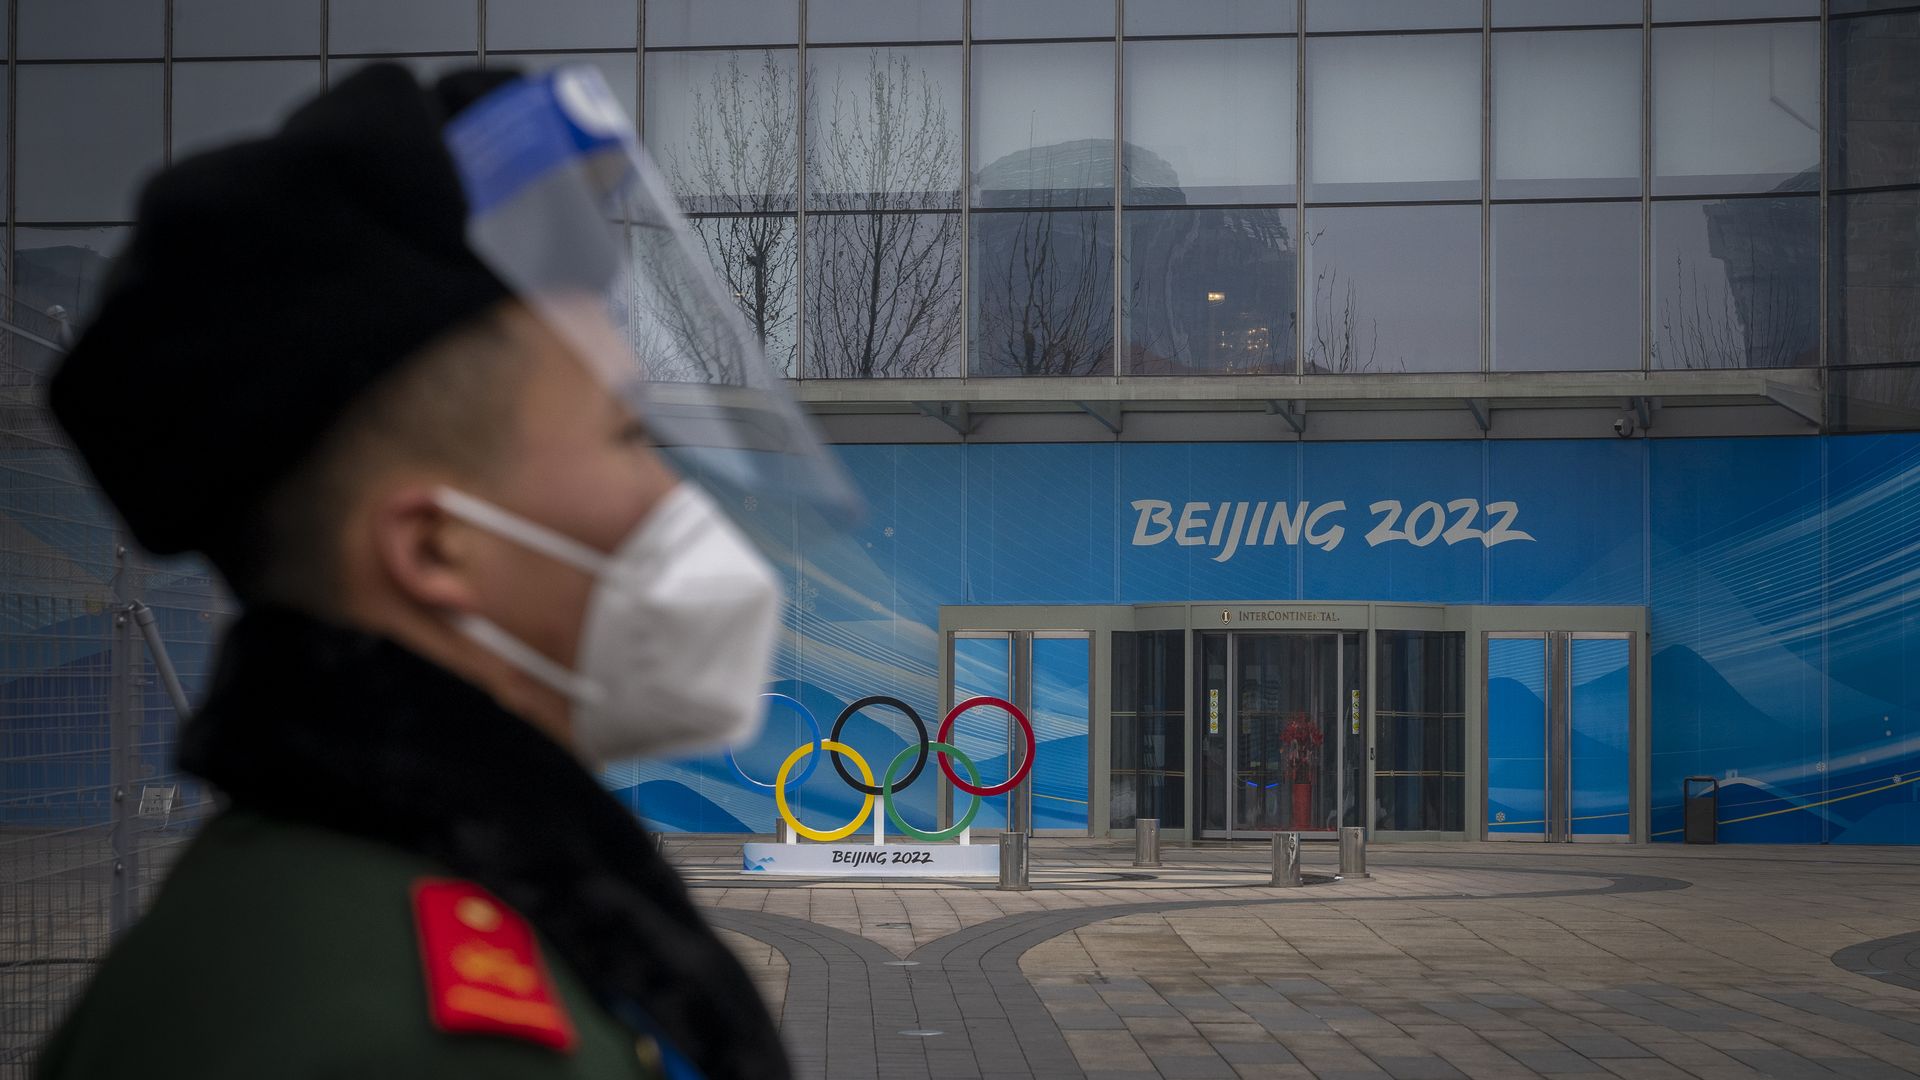 A security guard stands behind a barricade in an area not accessible to the general public, that will host Beijing 2022 Winter Olympics at Olympic Park on January 23